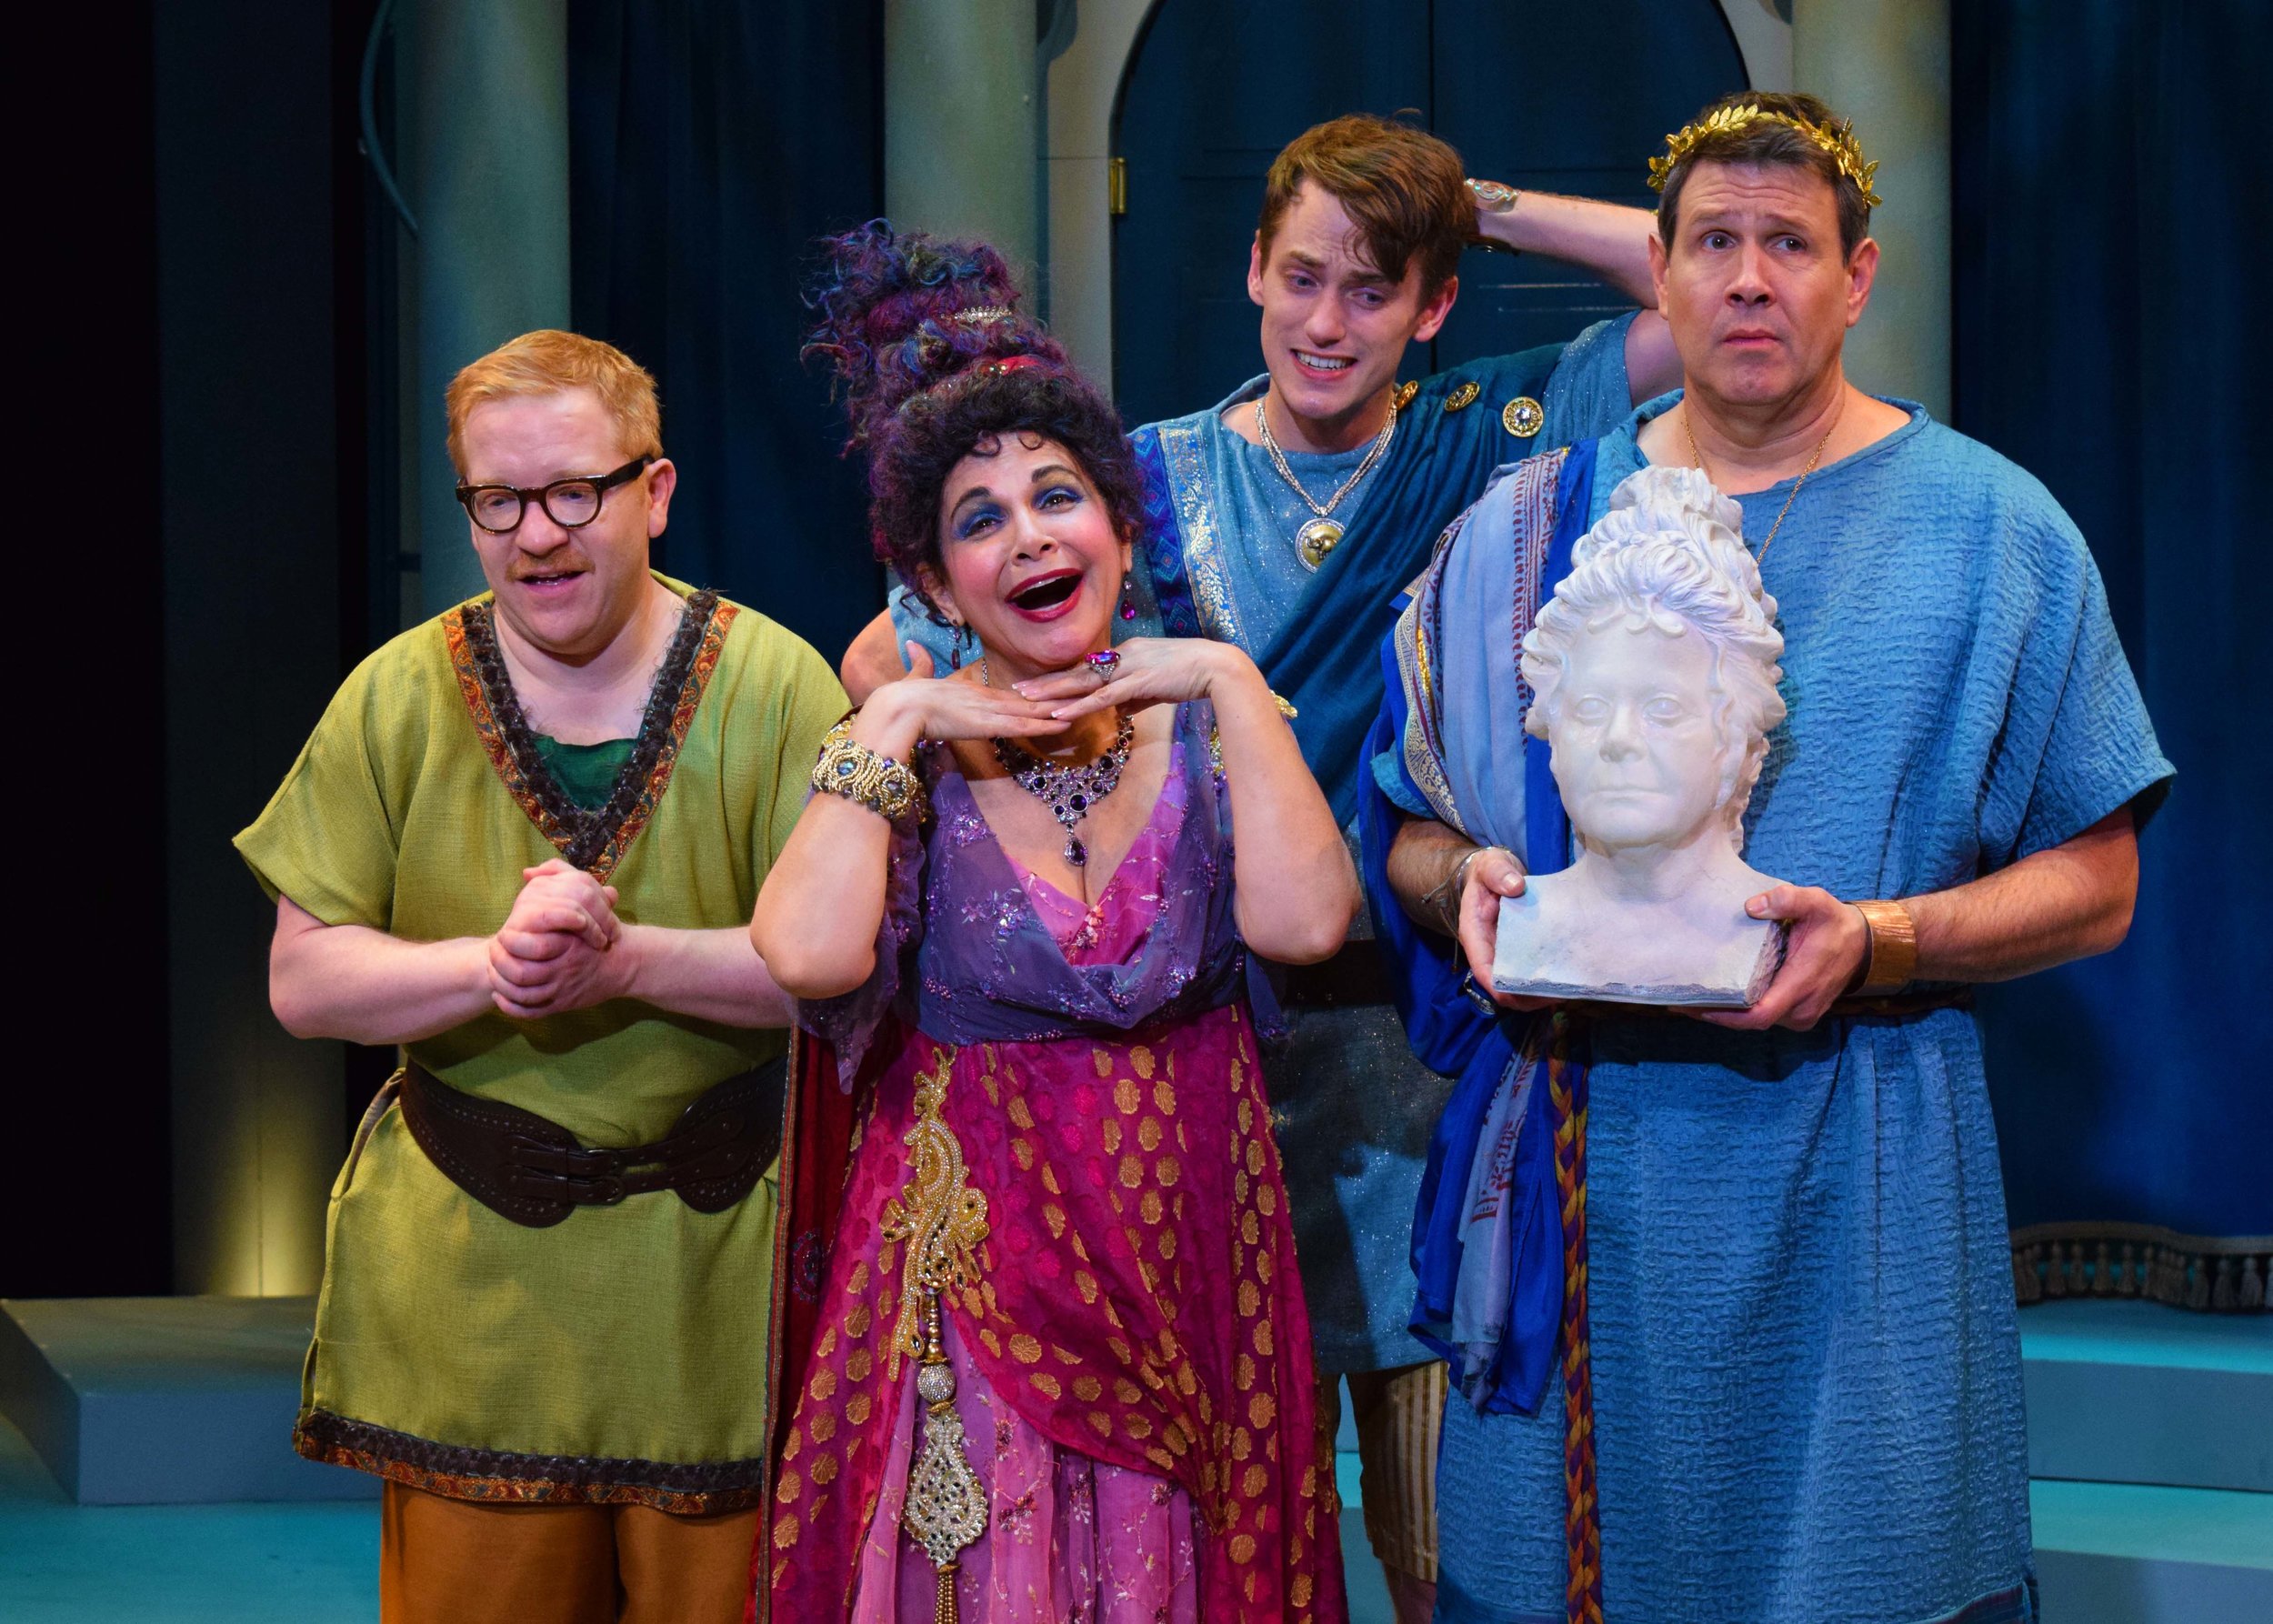  Hysterium (Ethan Cohn), Domina (Candi Milo), Hero (Michael Thomas Grant), and Senex (Kevin Symons) in A Funny Thing Happened On The Way To The Forum at the Garry Marshall Theatre. Photo by Chelsea Sutton.&nbsp; 